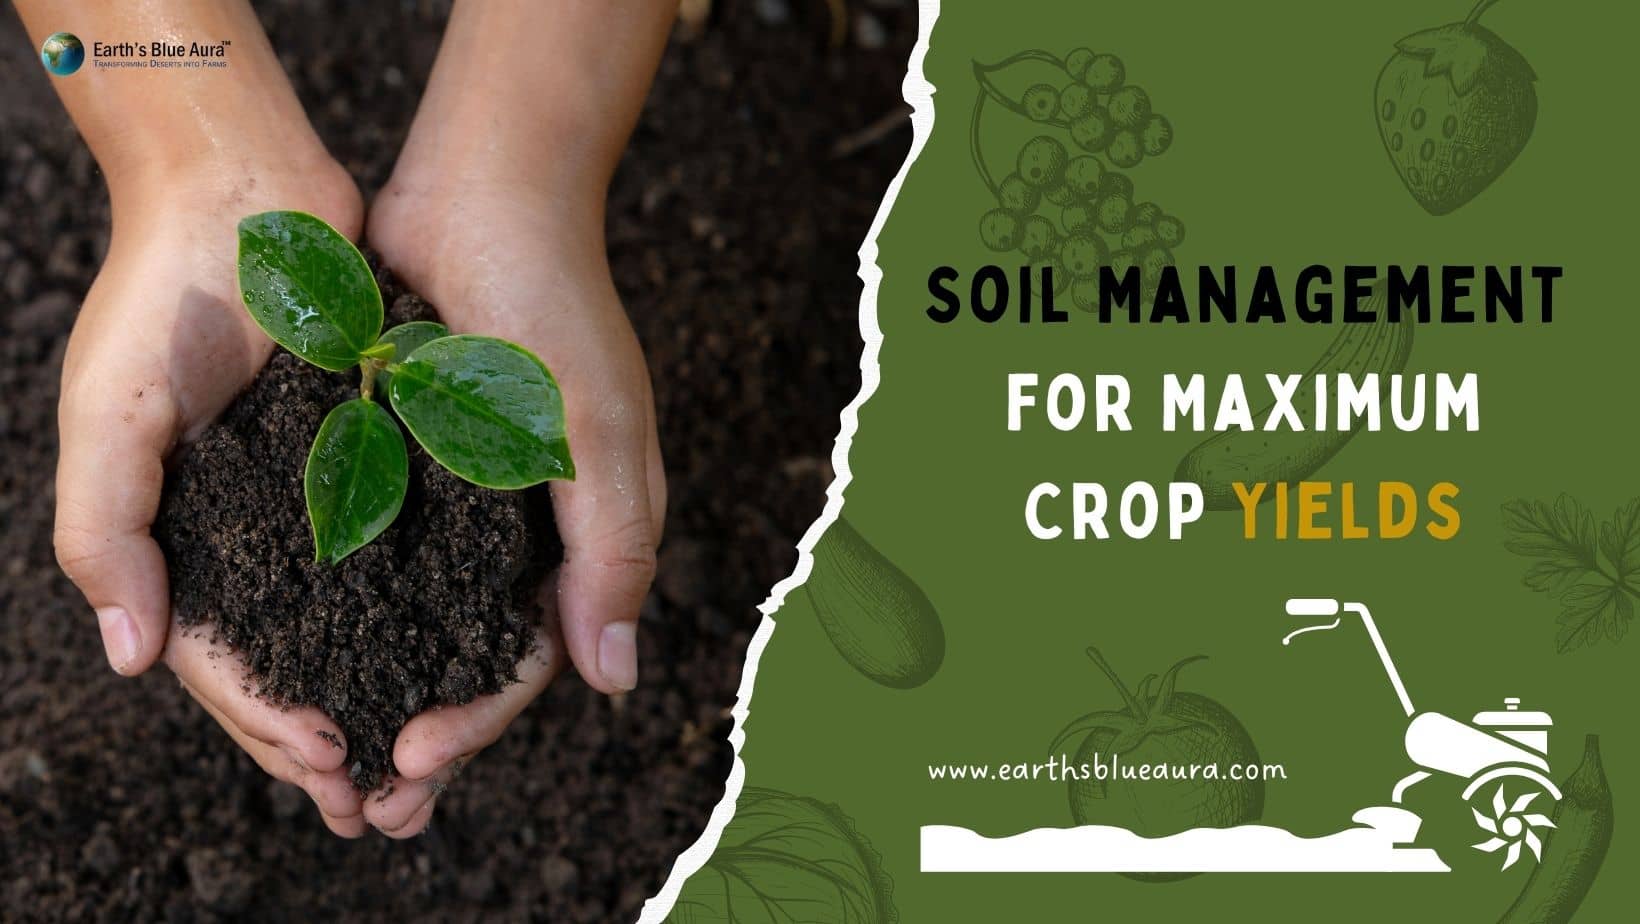 An Overview of Soil Management for Maximum Crop Yields